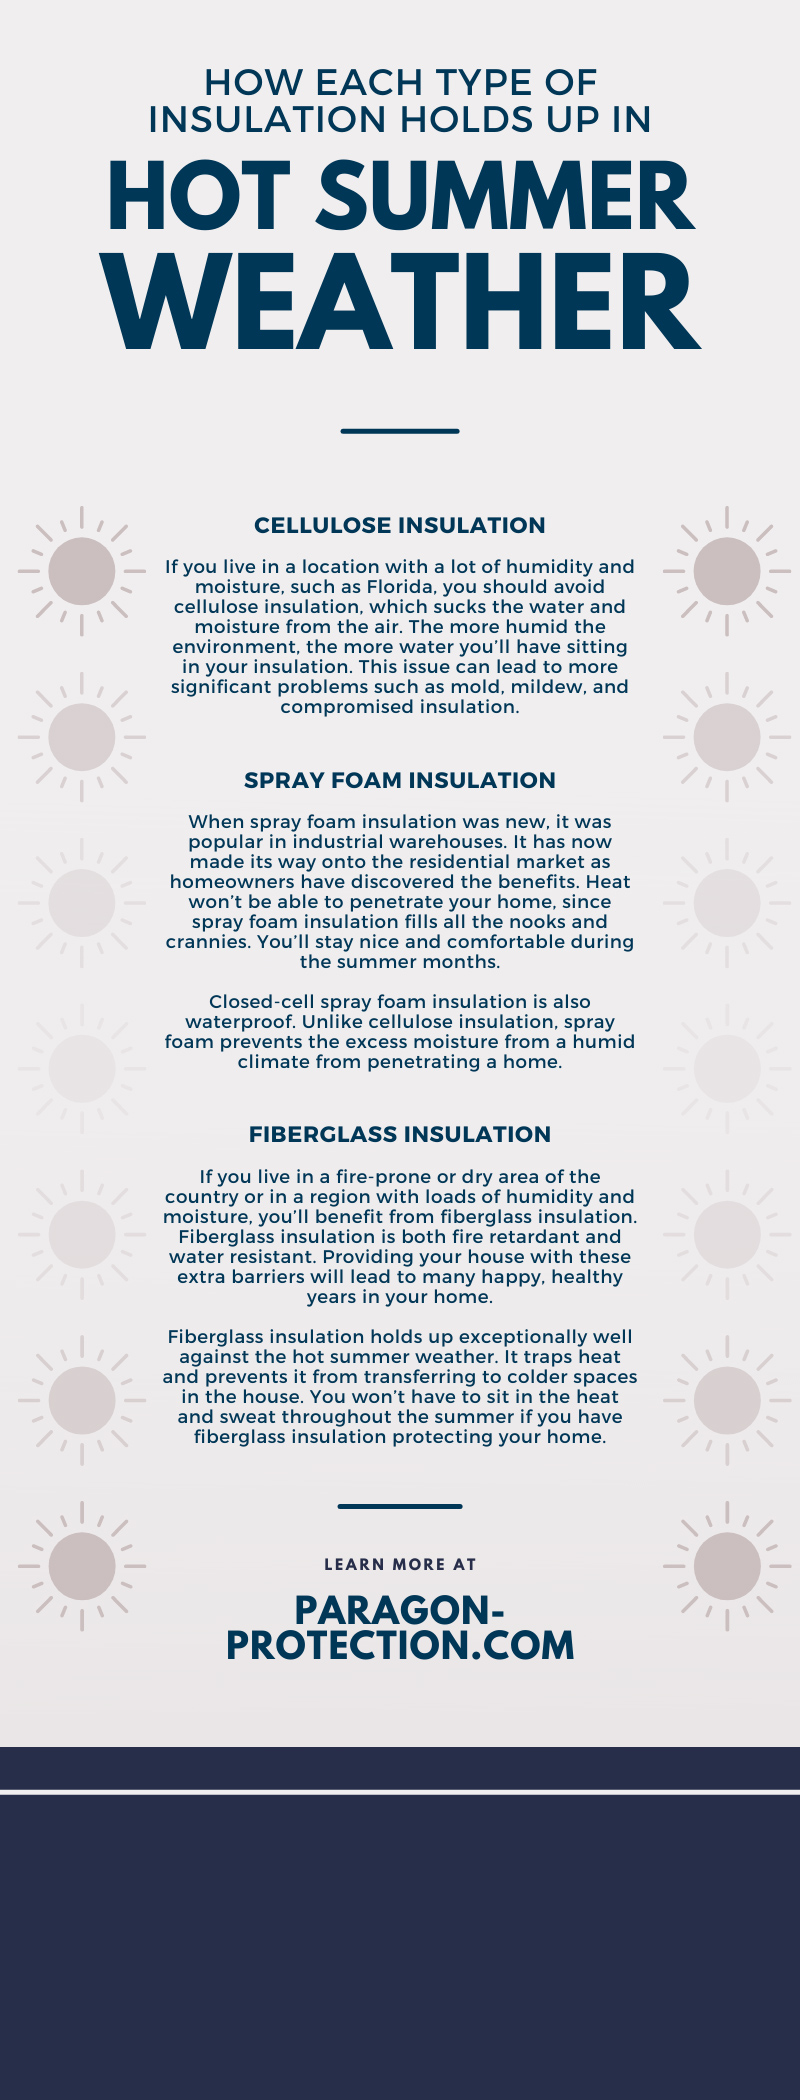 How Each Type of Insulation Holds Up in Hot Summer Weather
